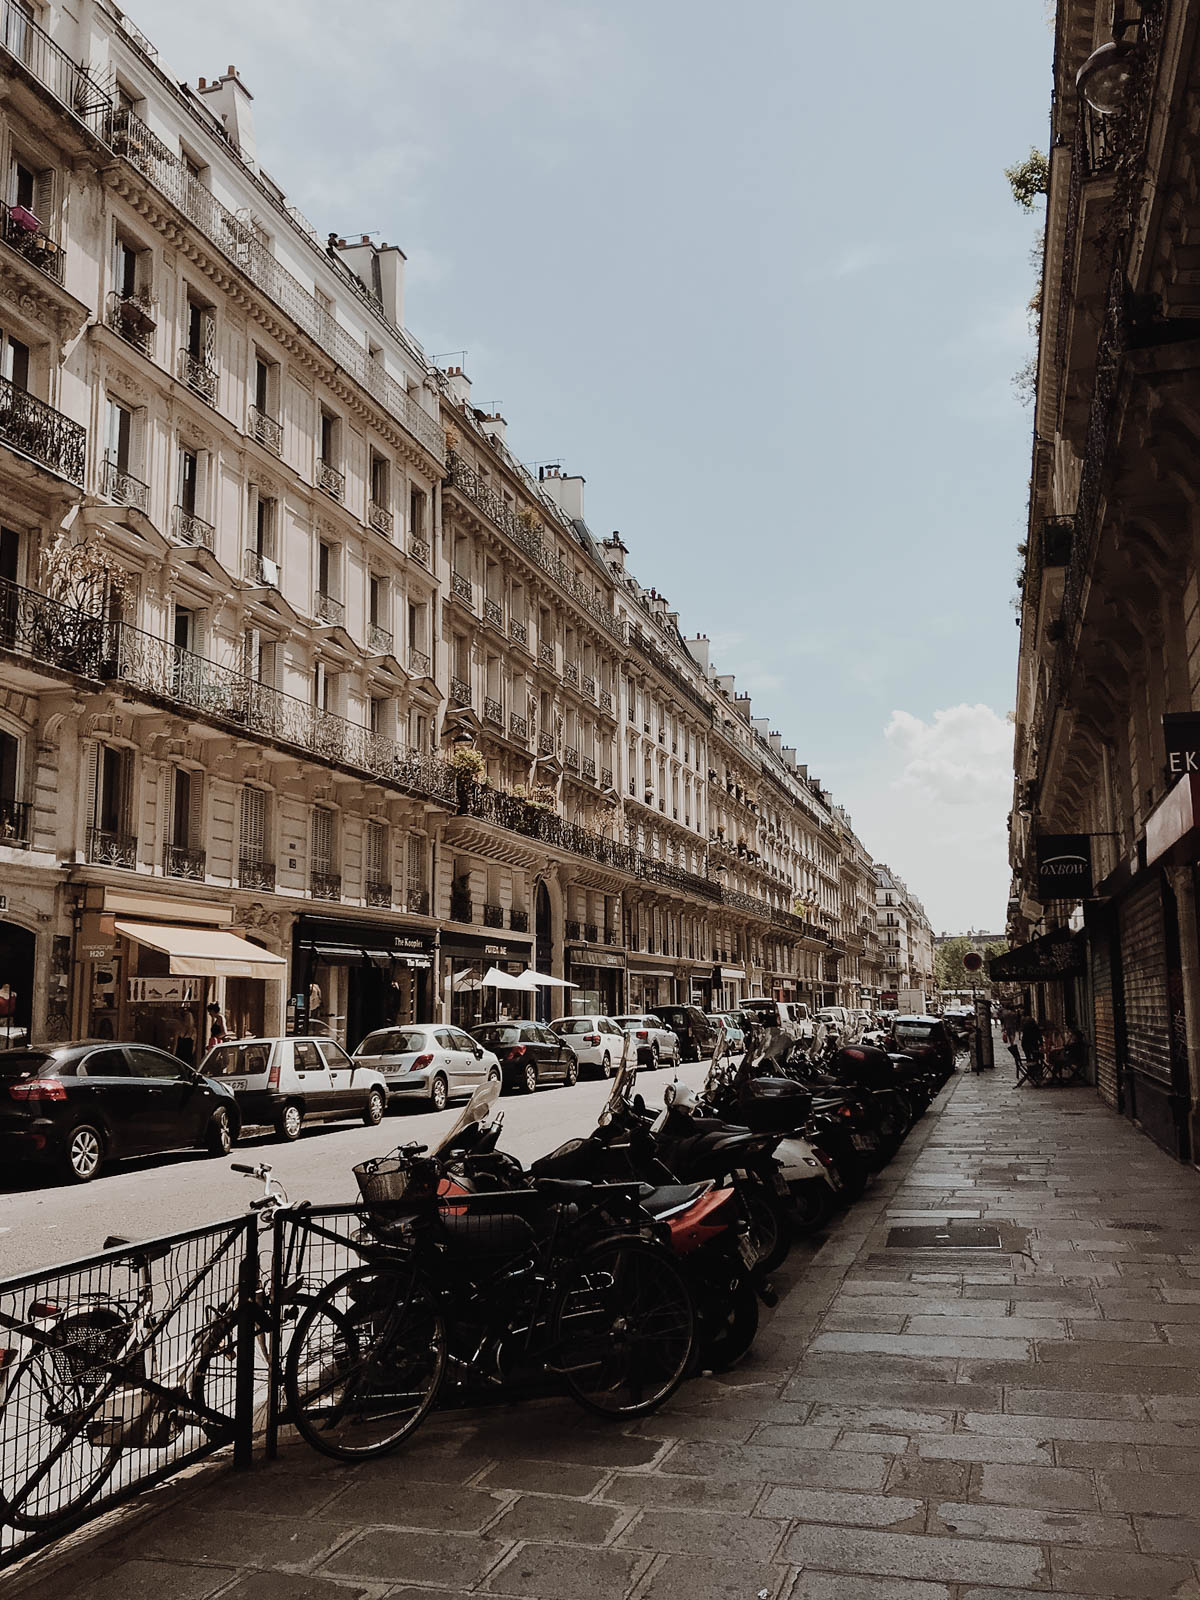 Paris France Travel Guide - Street Photography, European Architecture / RG Daily Blog